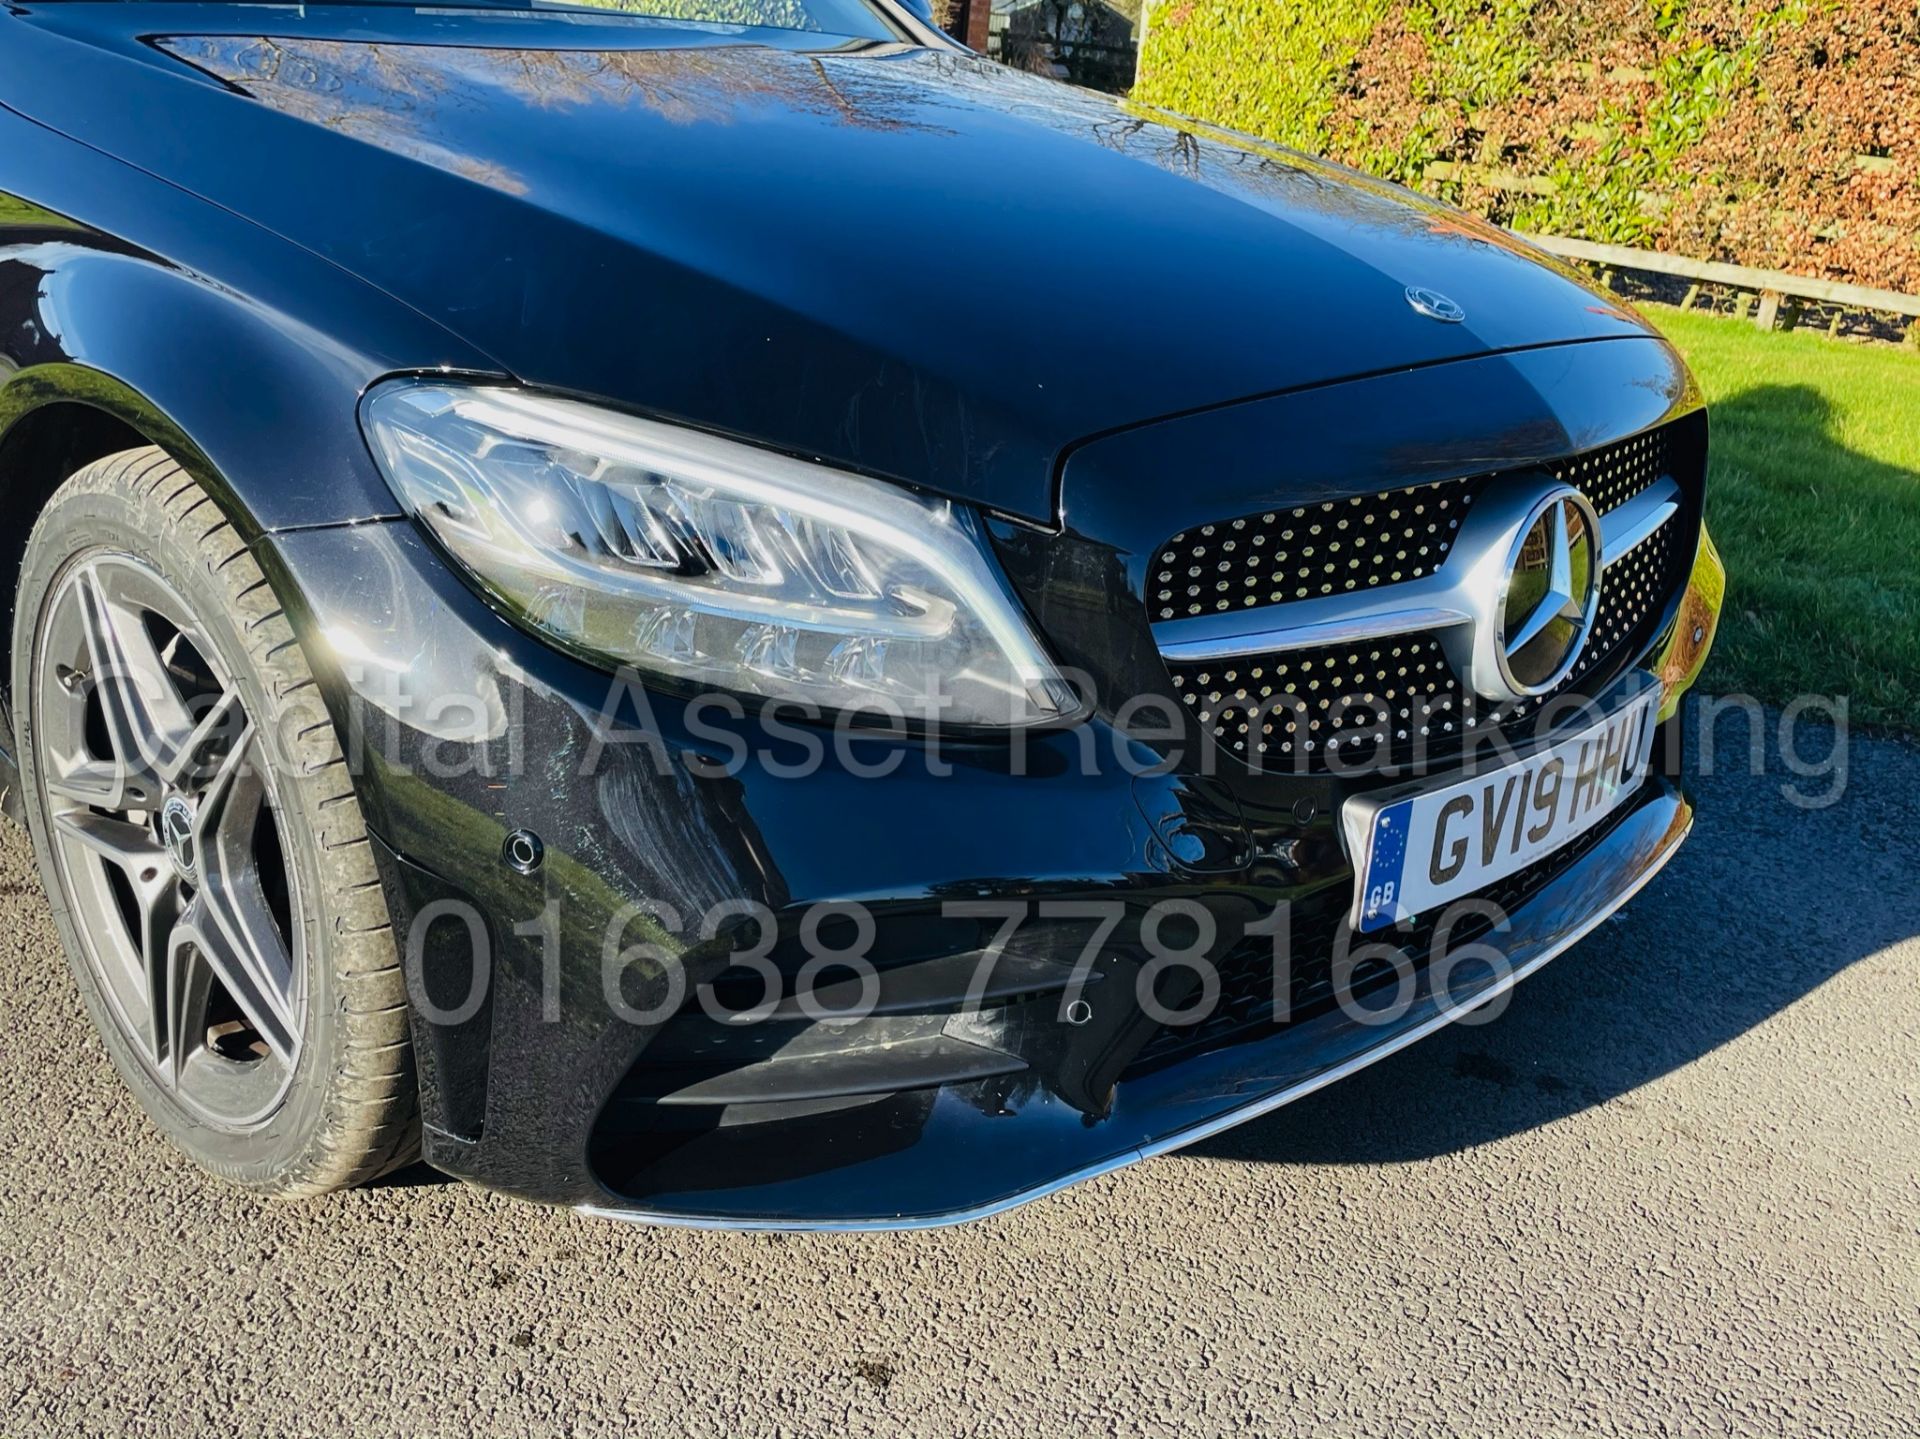 ON SALE MERCEDES-BENZ C220D *AMG LINE - CABRIOLET* (2019) '9G TRONIC AUTO - LEATHER - SAT NAV' - Image 29 of 59